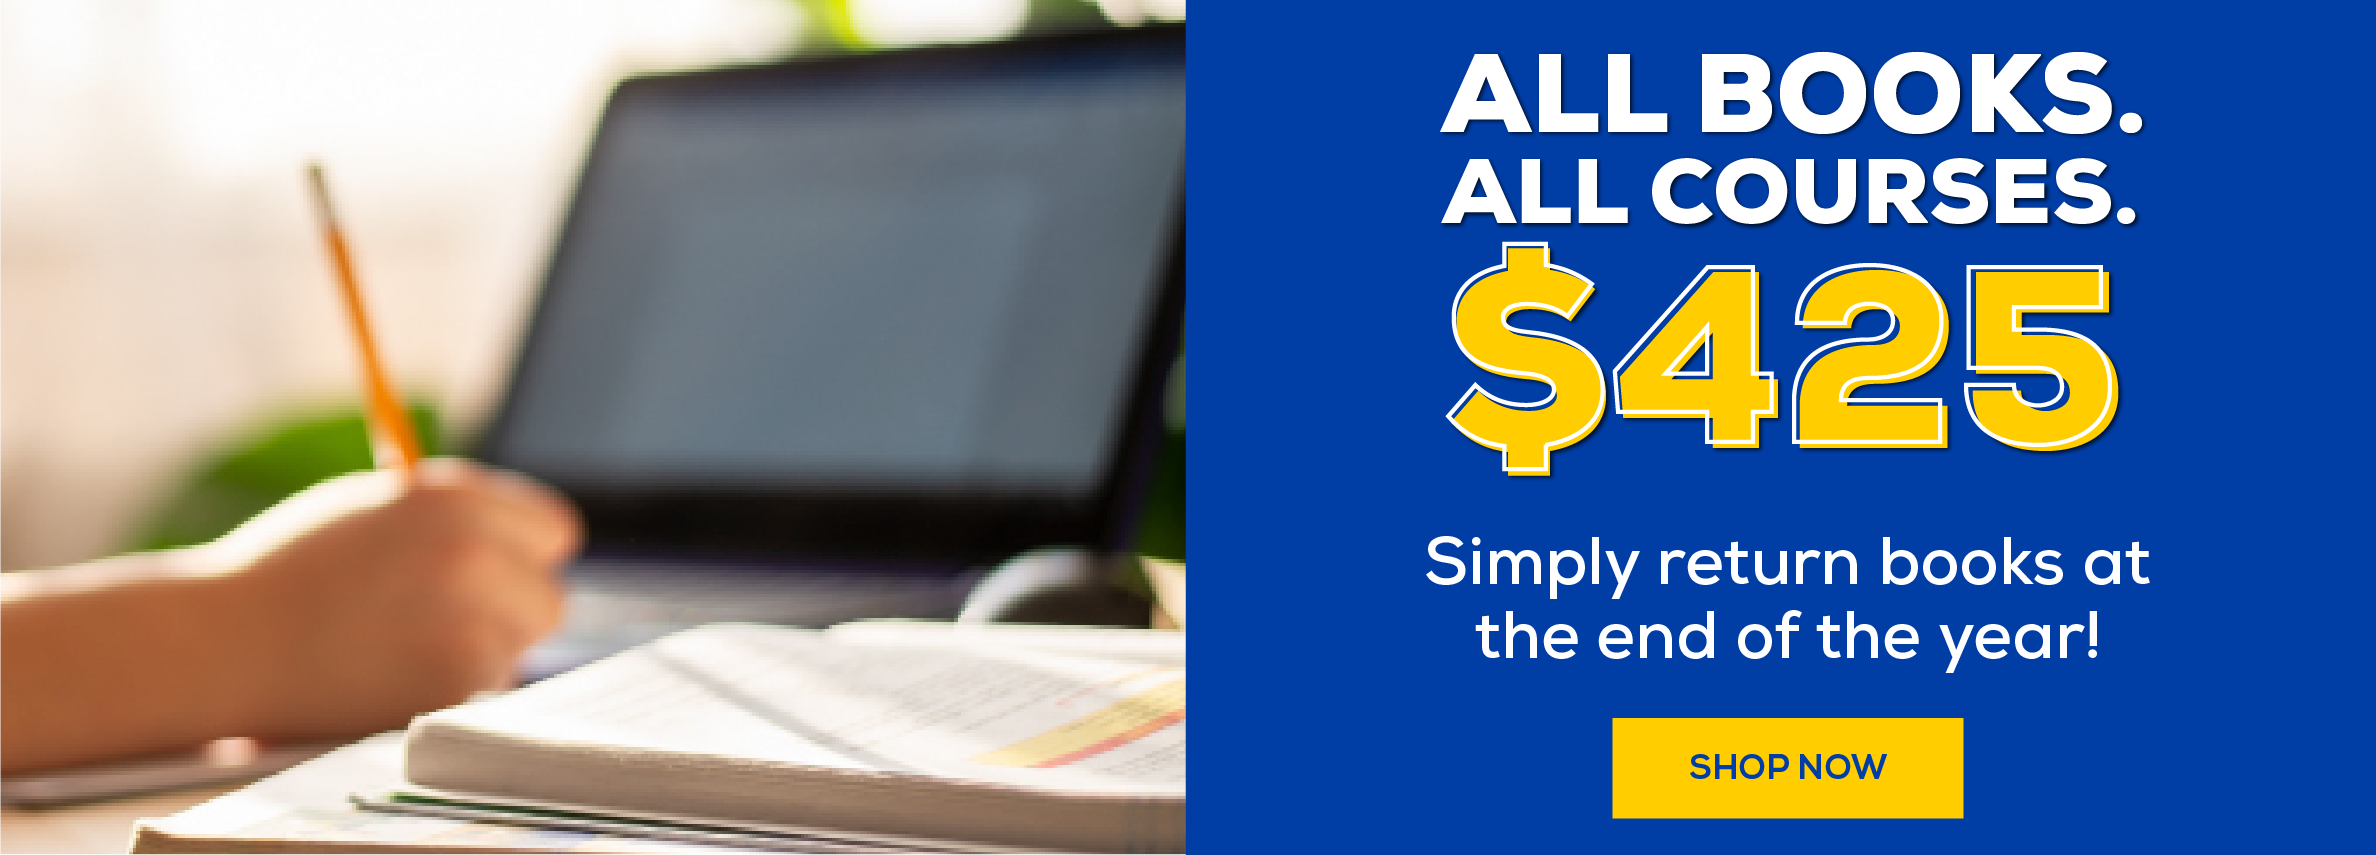 All books. All Courses. $425 Simply return books at the end of the year. shop now